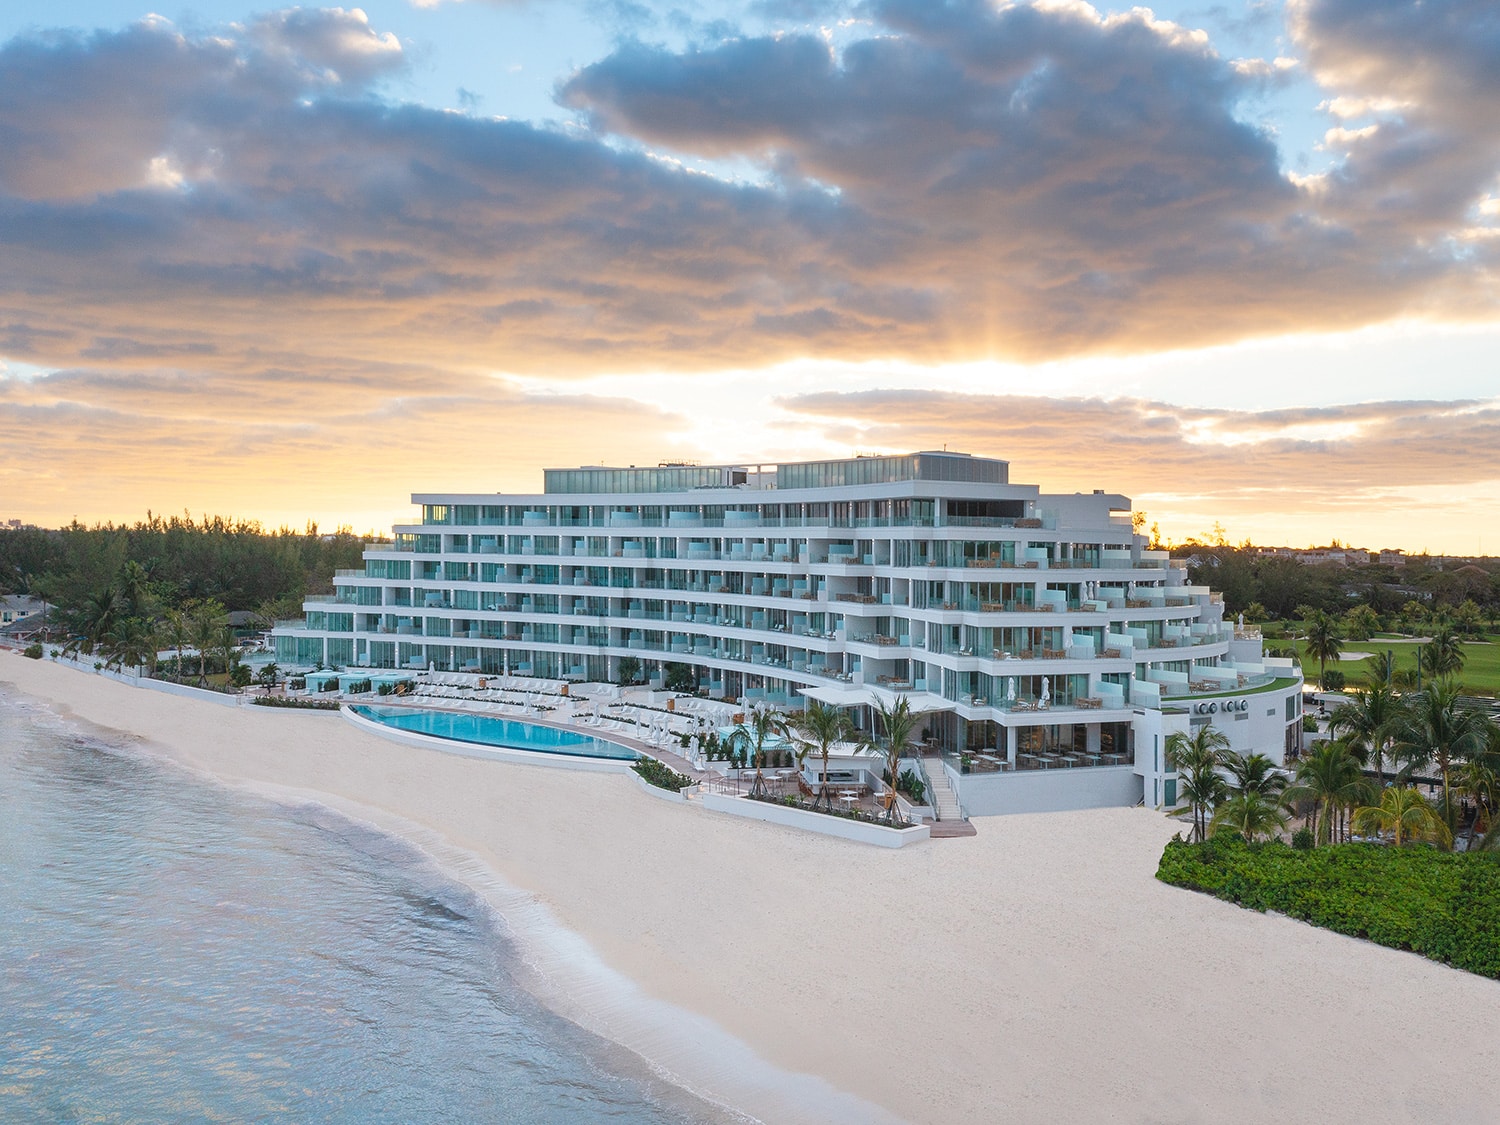 The exterior view of the new Goldwynn Resort and Residences on Cable Beach in Nassau, Bahamas.